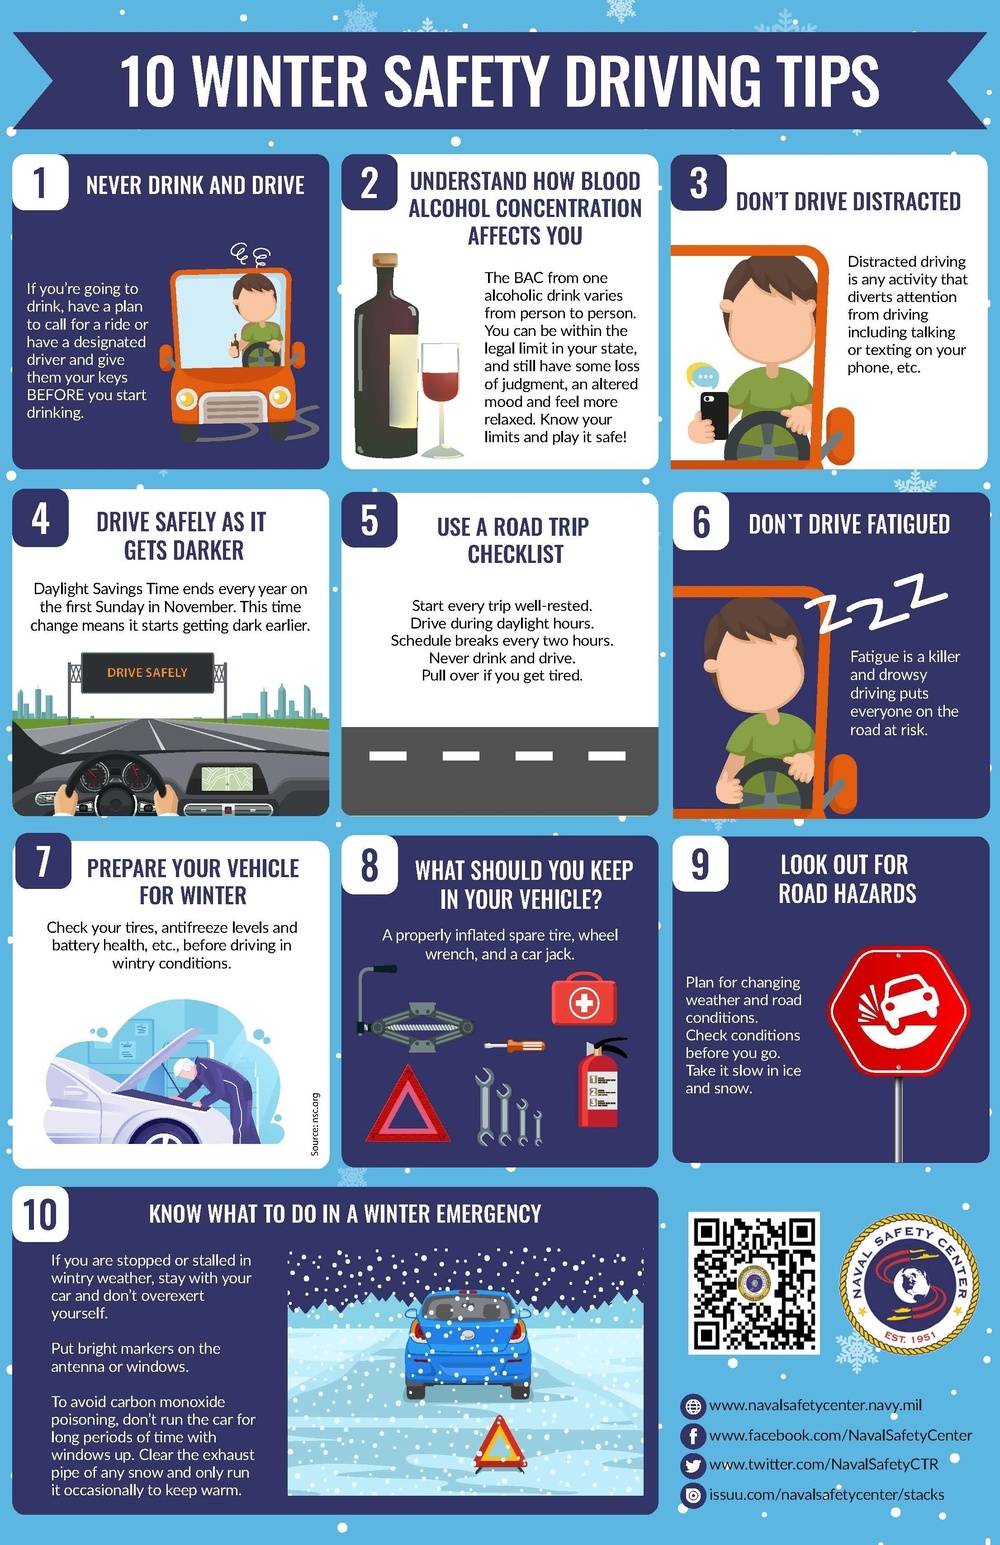 dvids-images-10-winter-safety-driving-tips-image-1-of-6